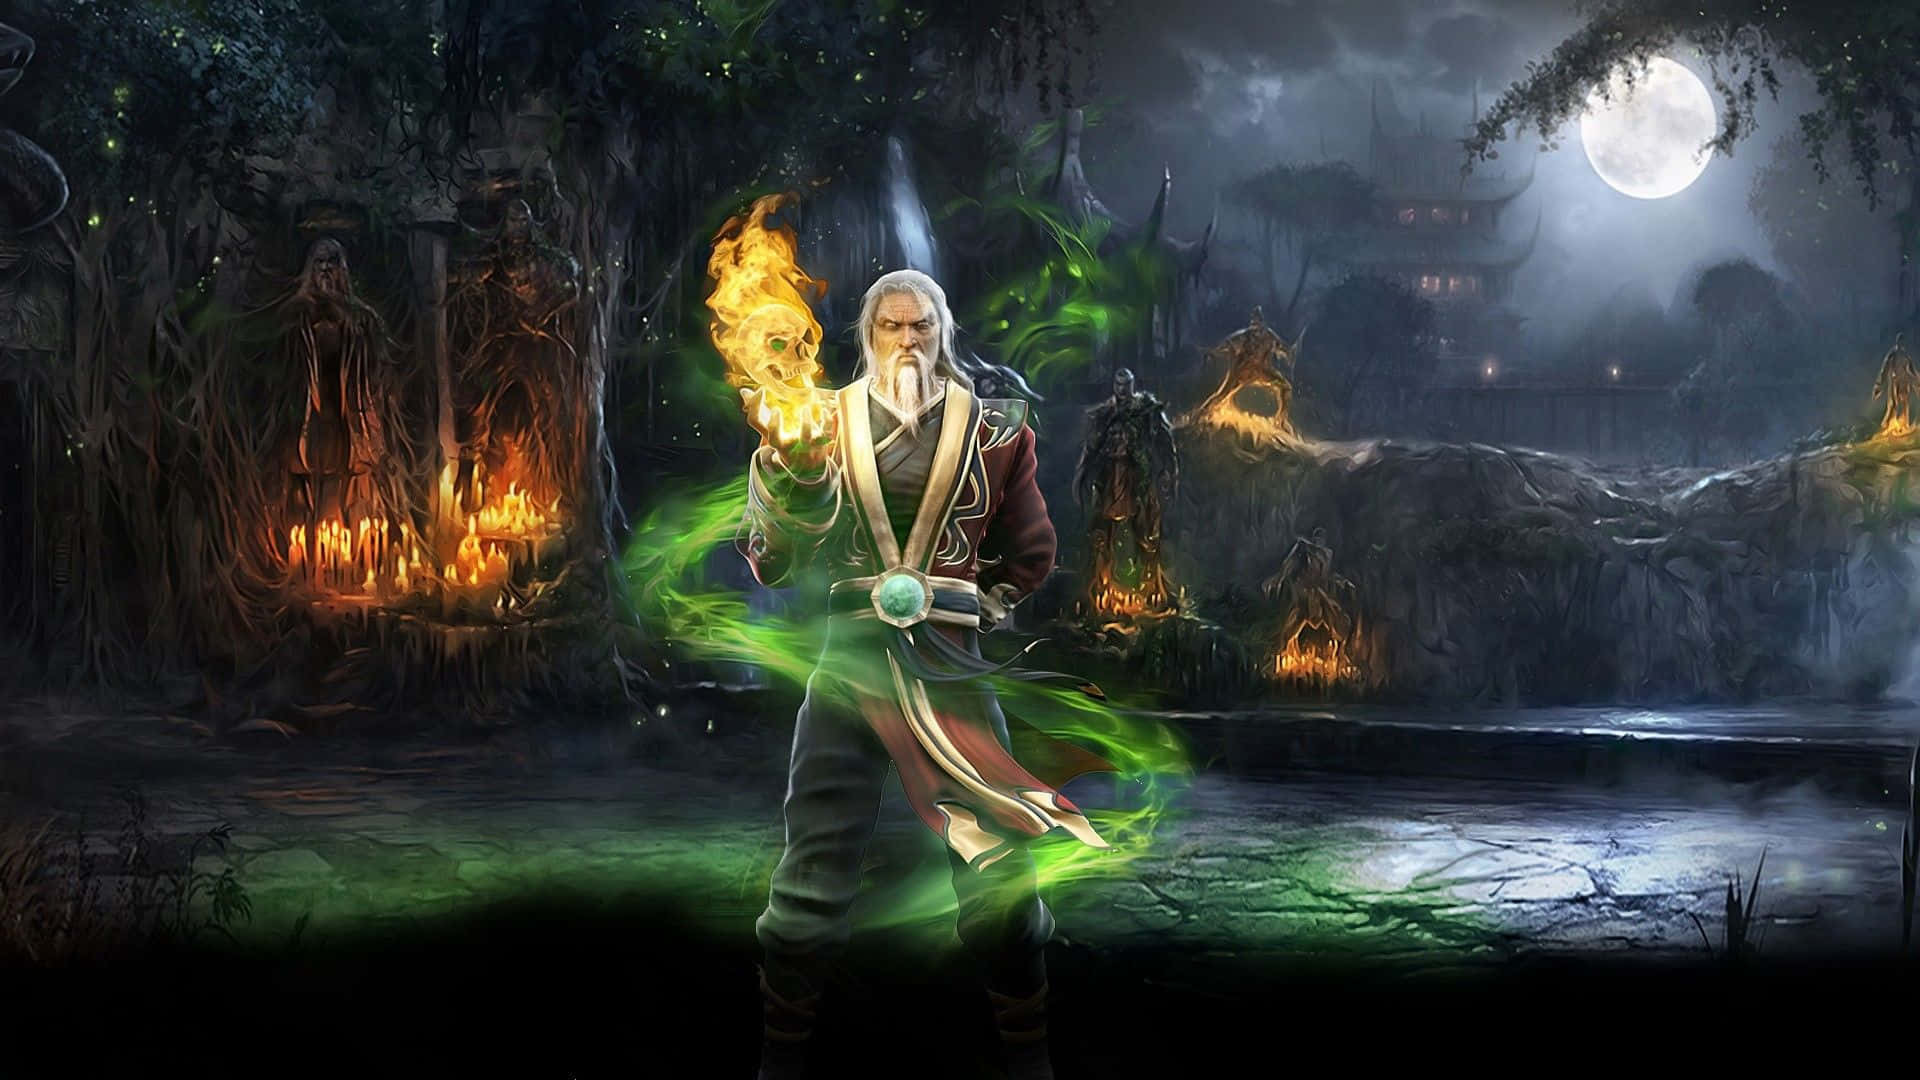 Master Wizard casting a powerful spell Wallpaper